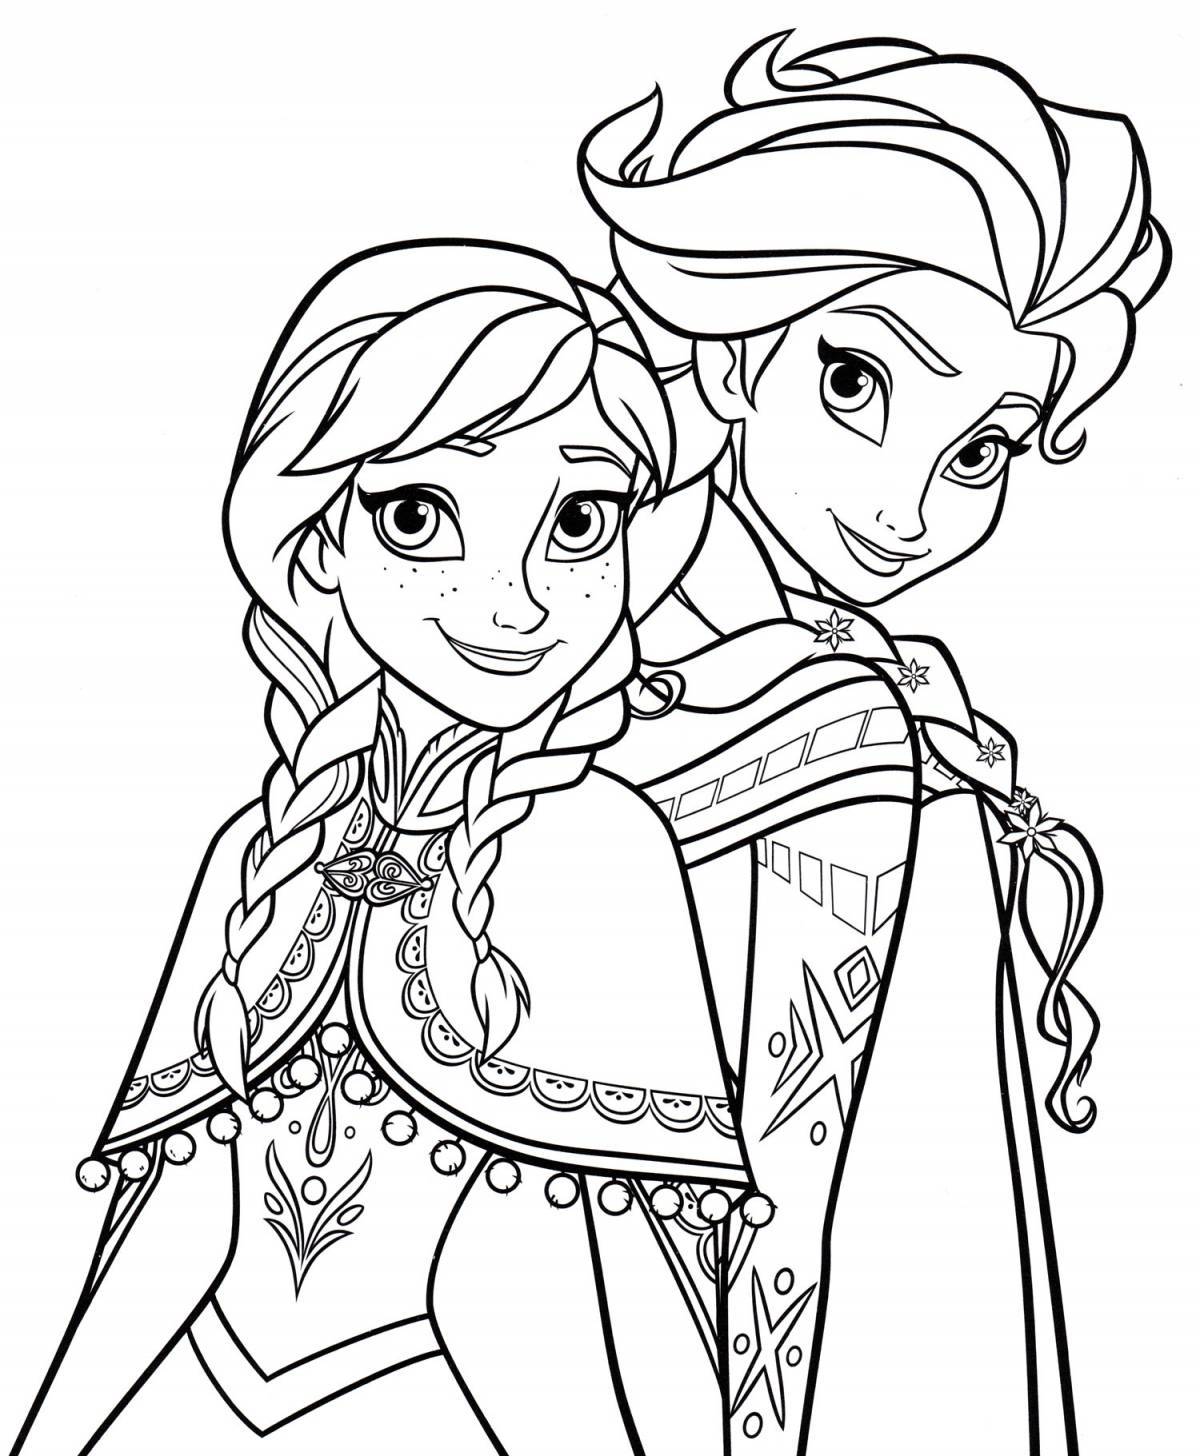 Playful coloring elsa and anna for kids